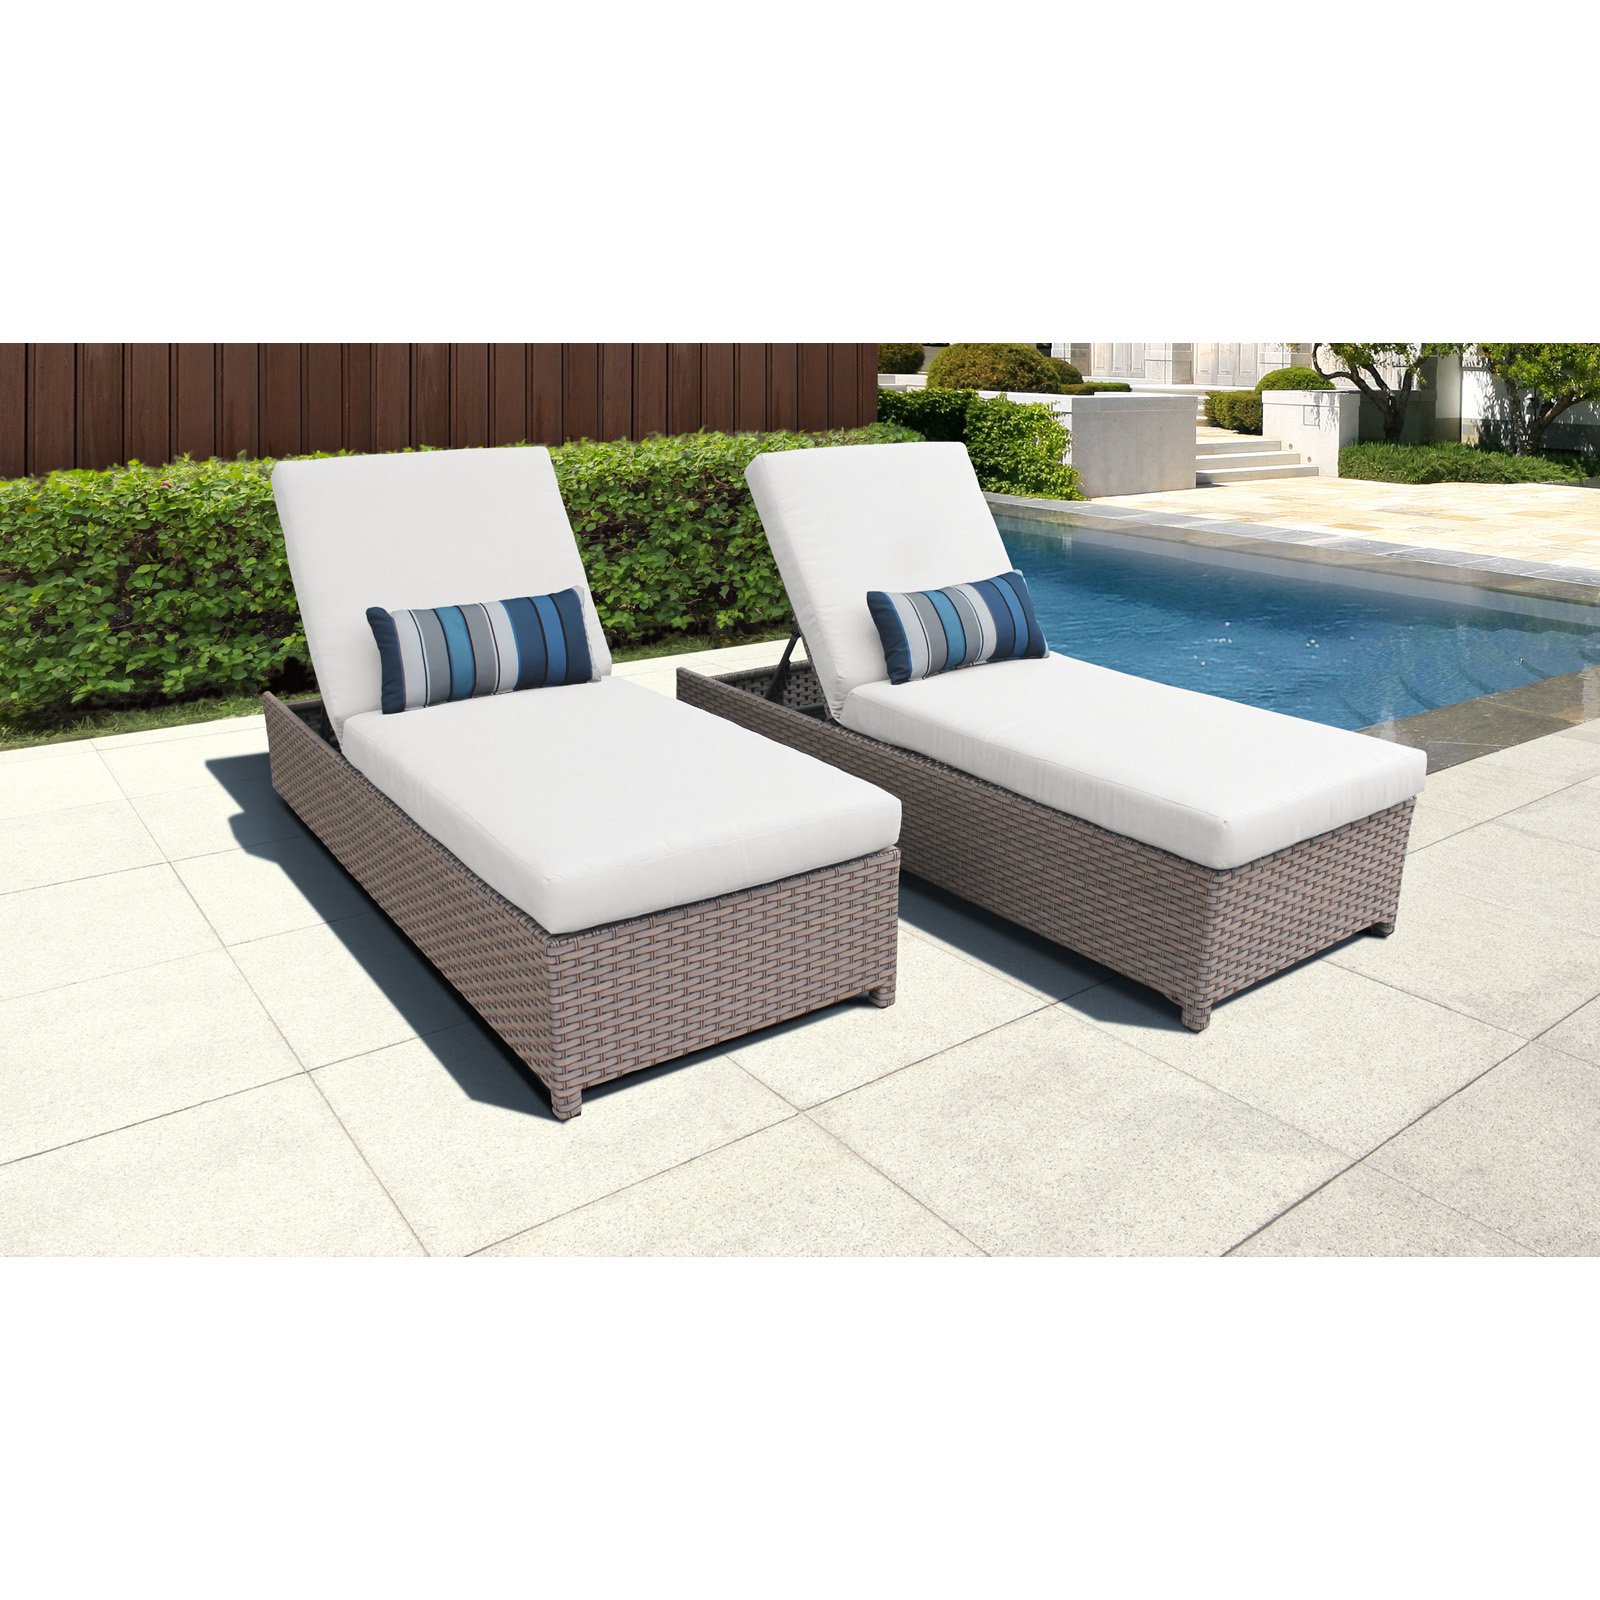 TK Classics Florence Wheeled Wicker Outdoor Chaise Lounge Chair - Set of 2 - image 3 of 11